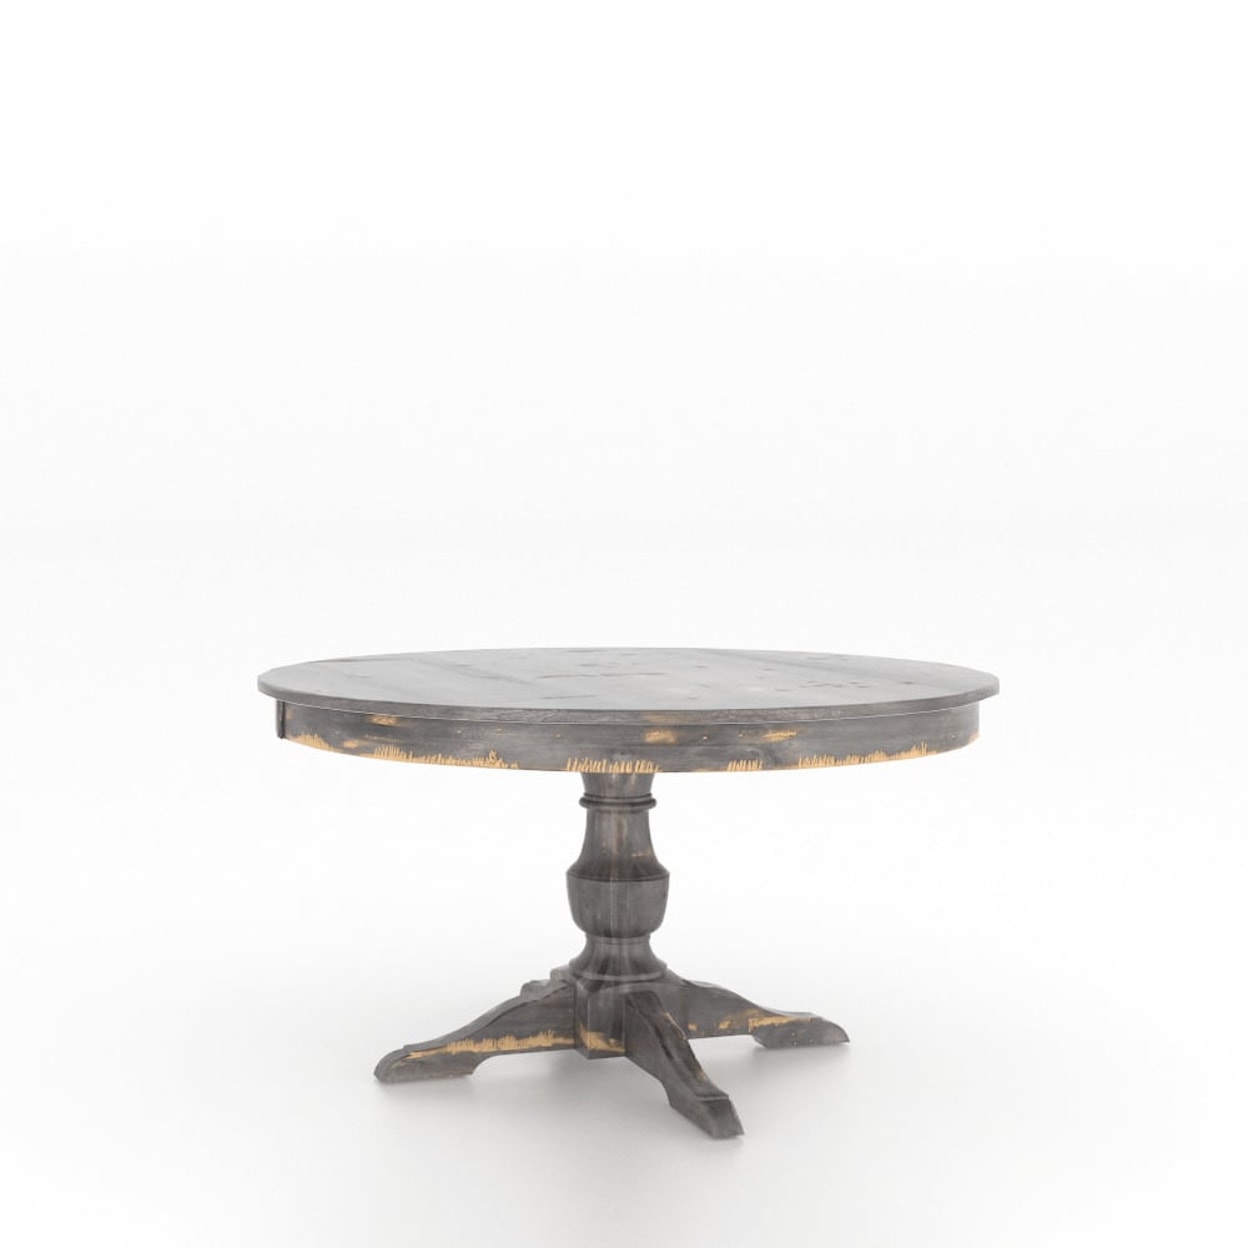 Canadel Champlain Customizable 54" Round Wood Solid Top Table